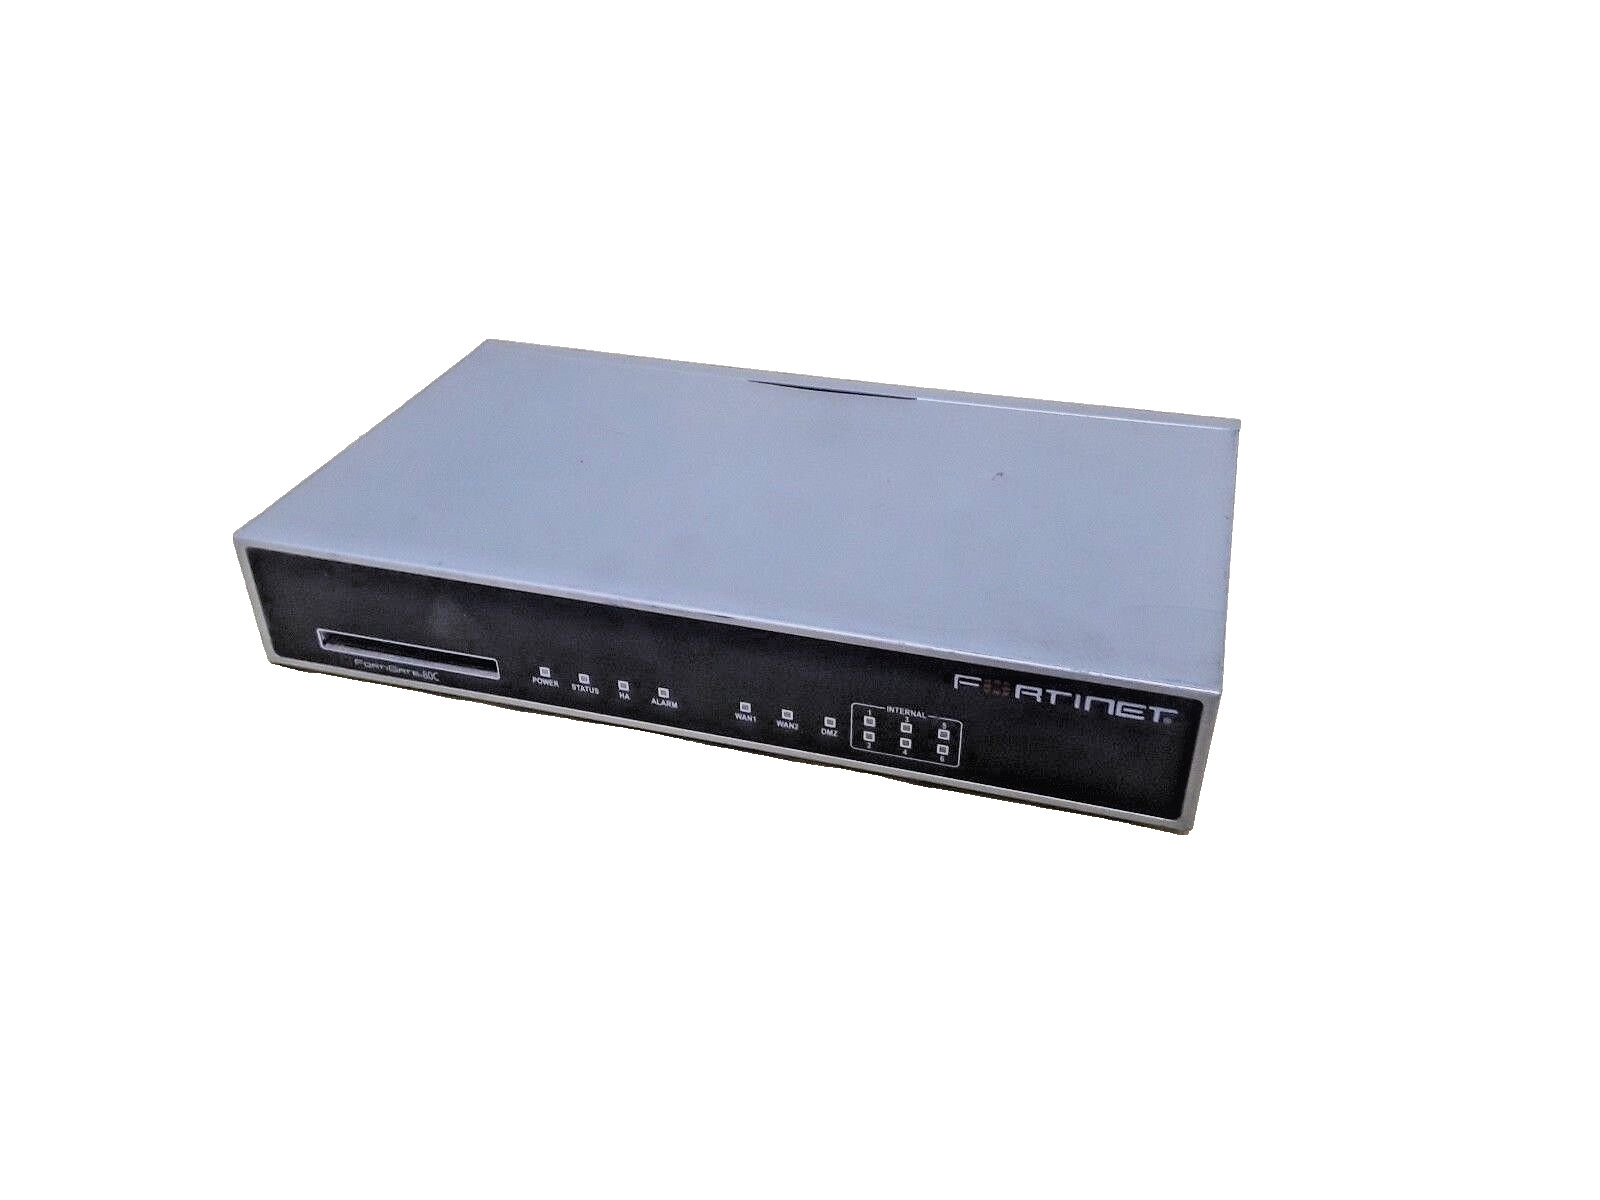 Fortinet Fortigate 80C FG-80C Firewall/Security Appliance